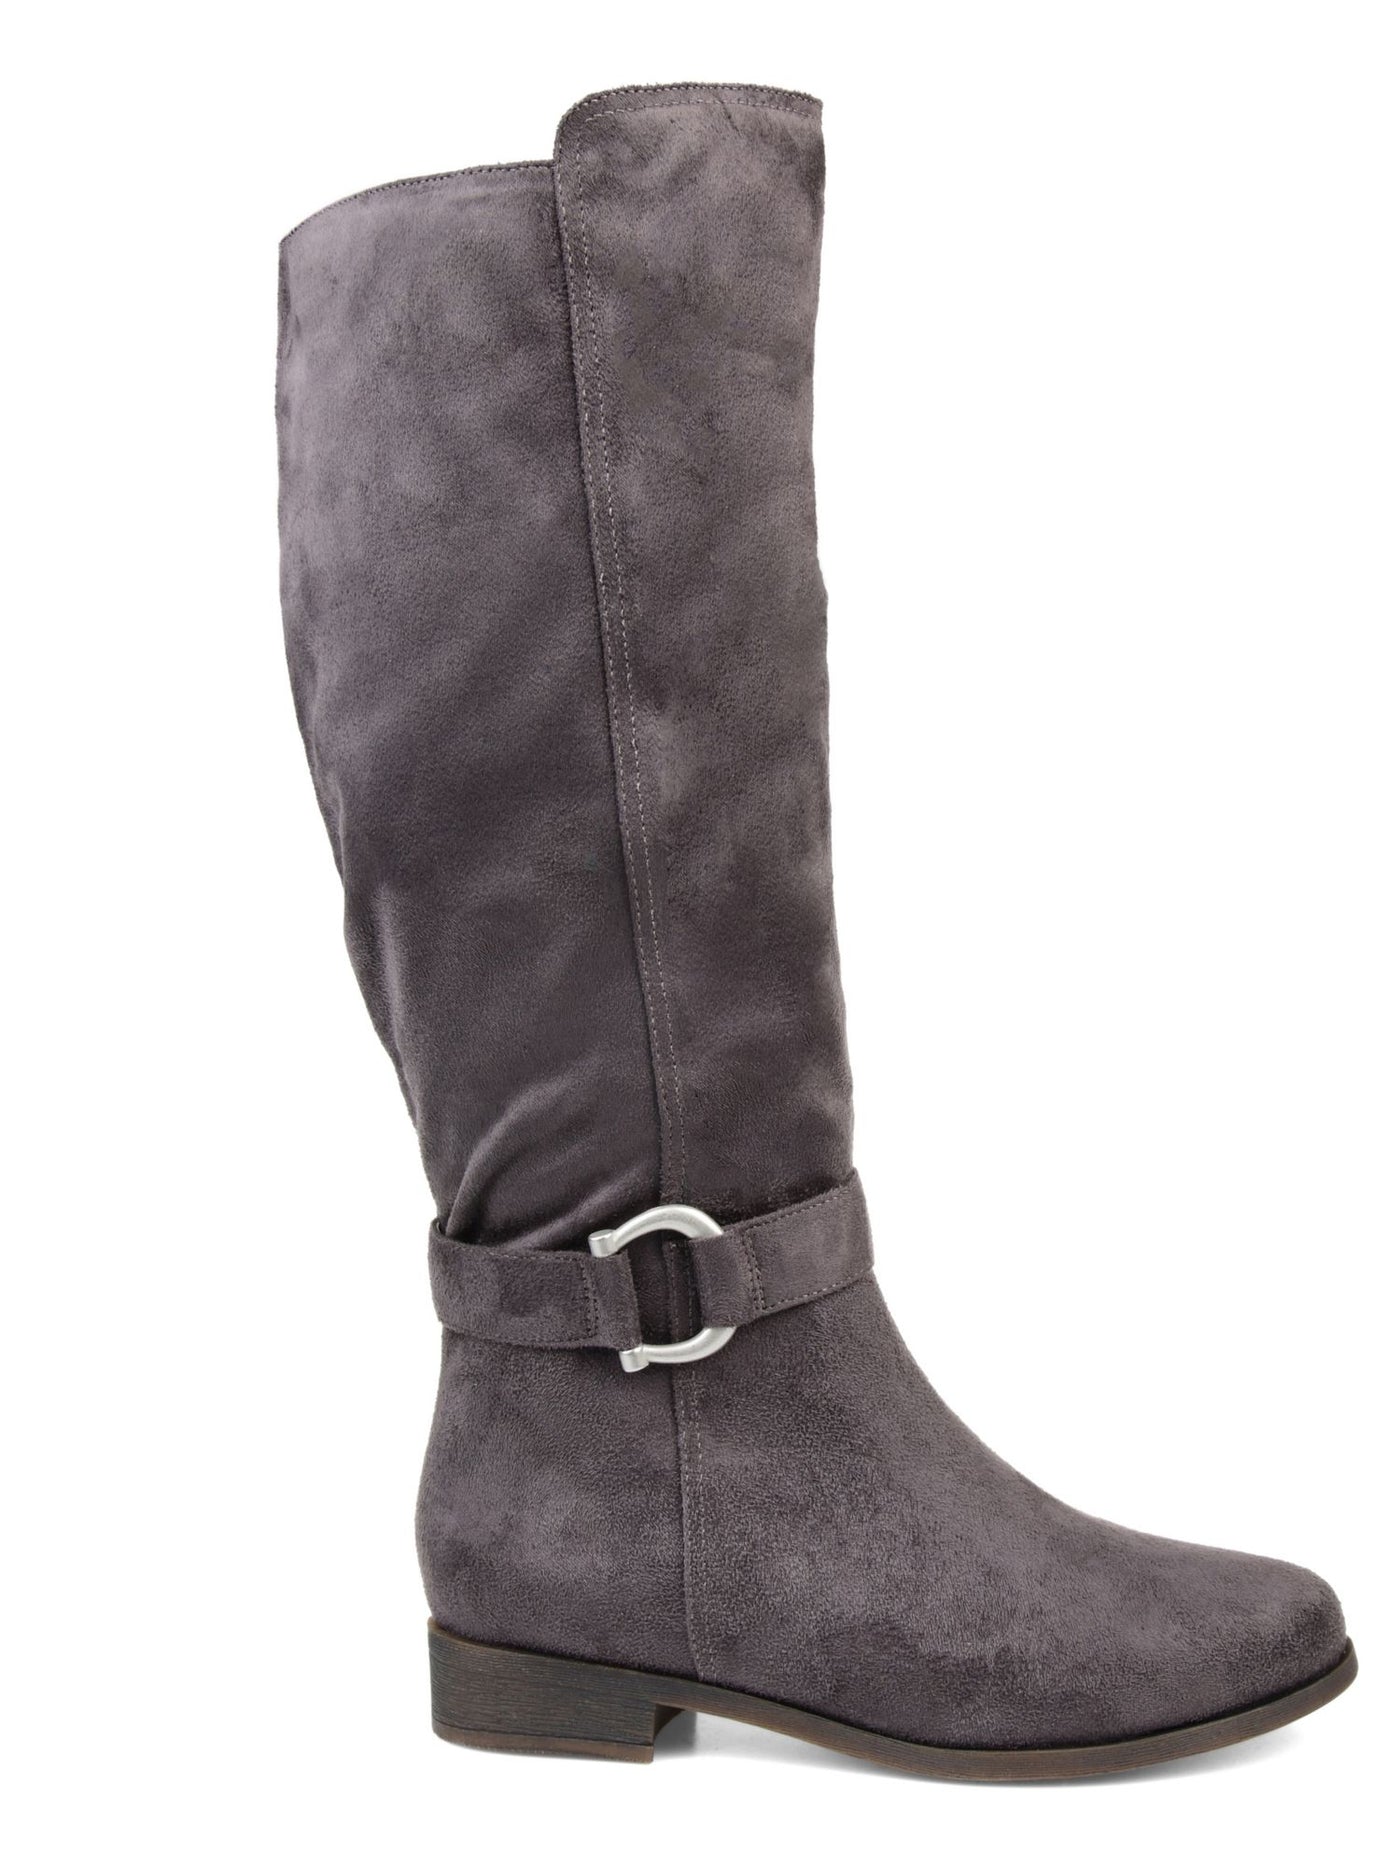 JOURNEE COLLECTION Womens Gray Buckle Accent Almond Toe Stacked Heel Zip-Up Boots Shoes 7.5